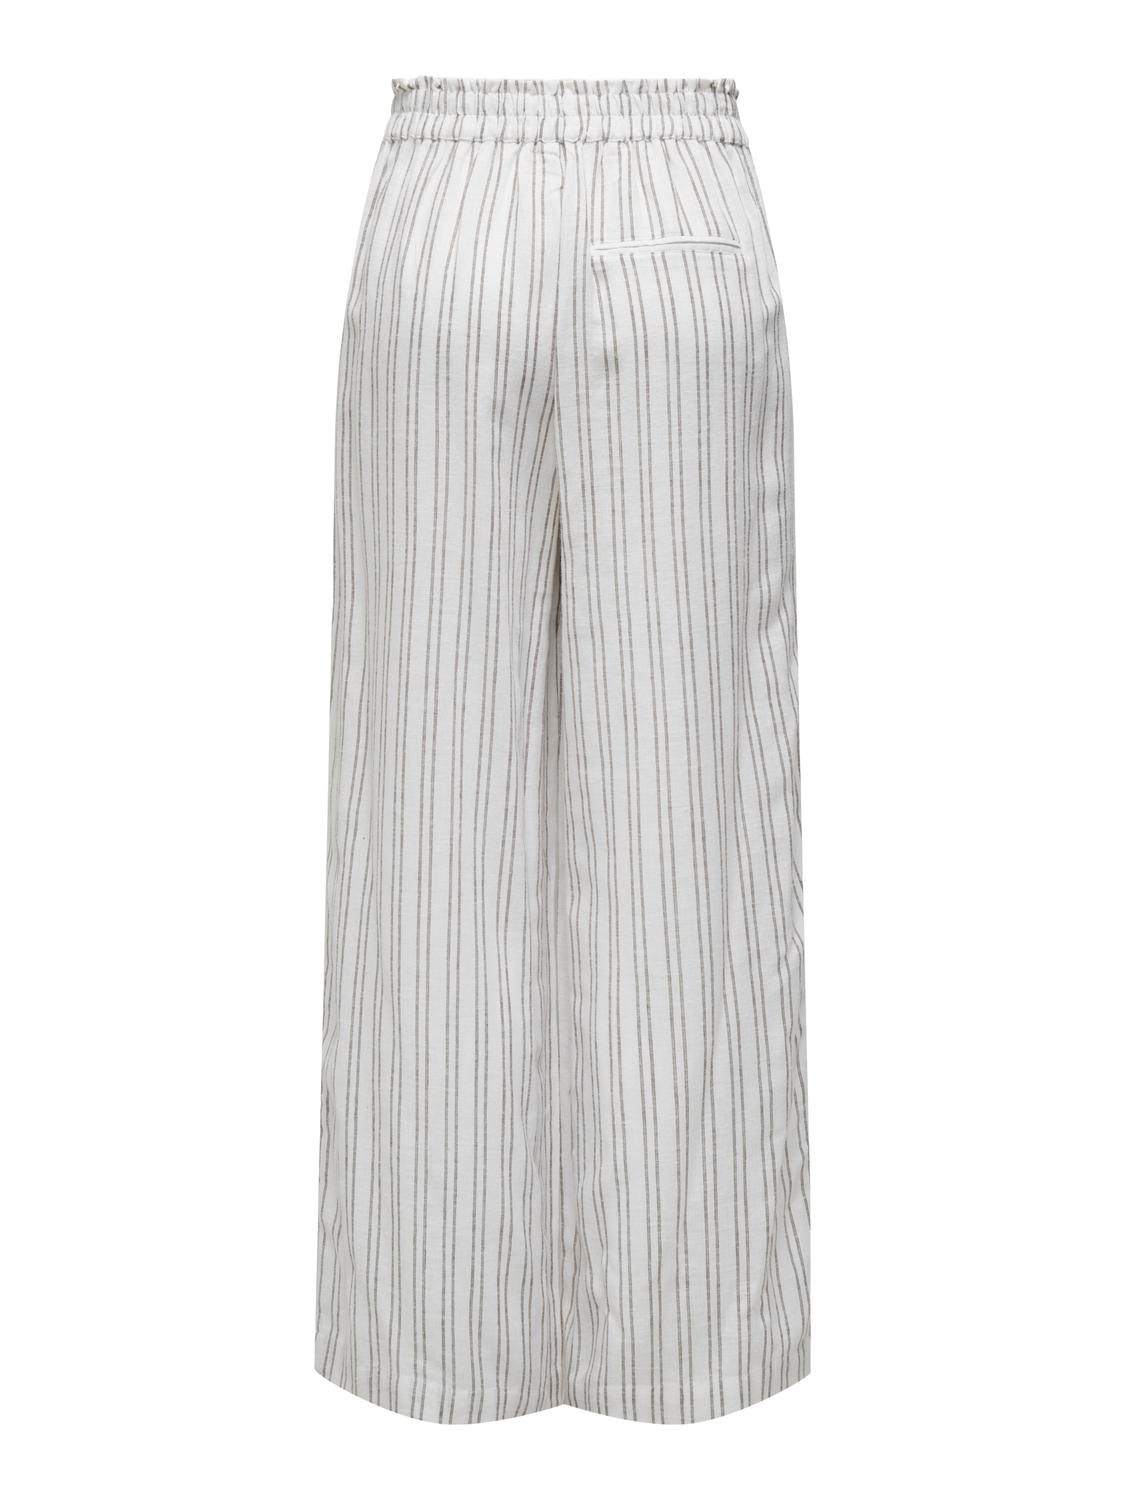 ONLY Straight Fit High waist Trousers -Bright White - 15315843